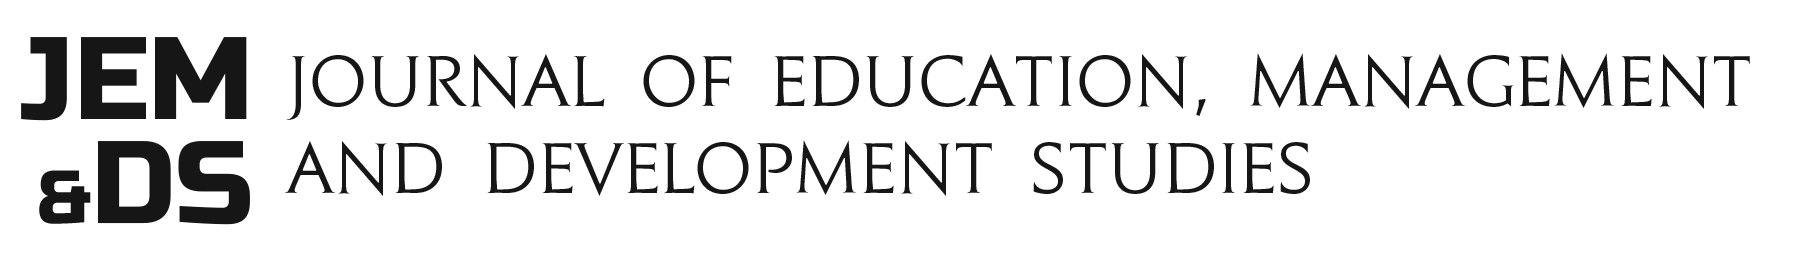 Journal of Education, Management and Development Studies